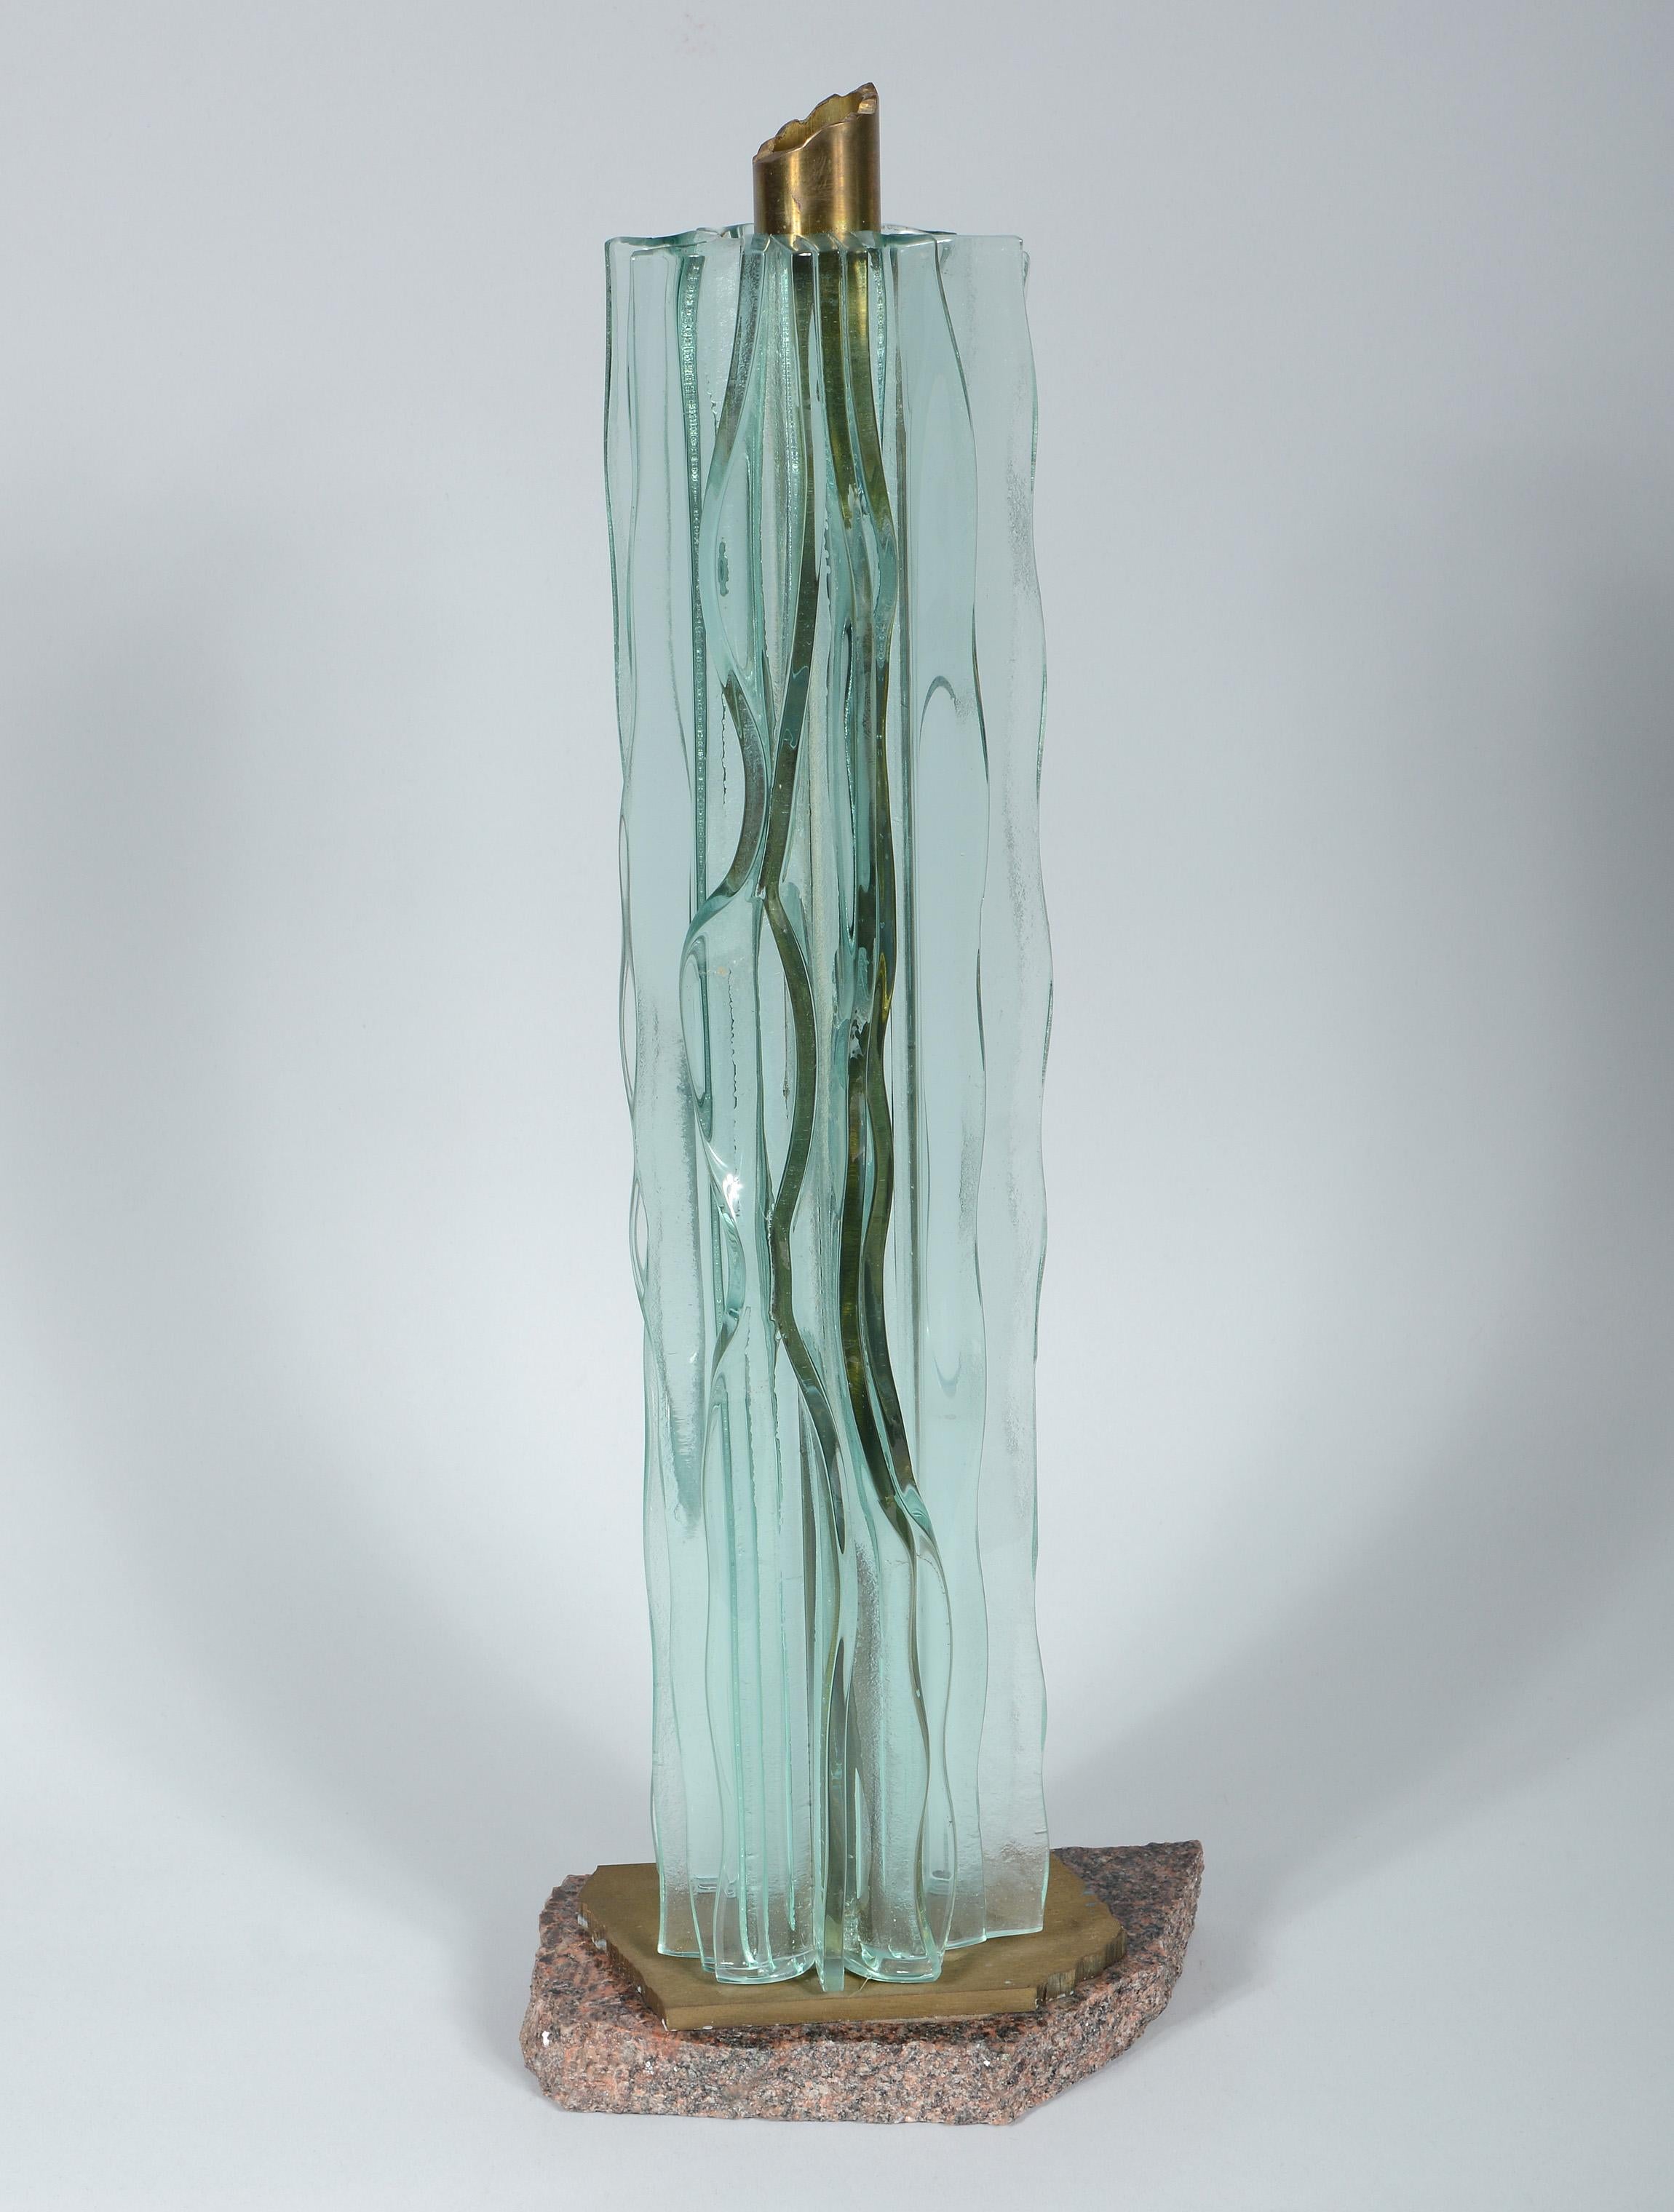 Tabletop sculpture by Seattle artist Nancy Mee. This has vertical undulating ribbons of fused glass around a column of bronze. The base is bronze and granite.
Nancy was born in Oakland, Calif. in 1951. She received a BFA in printmaking at the